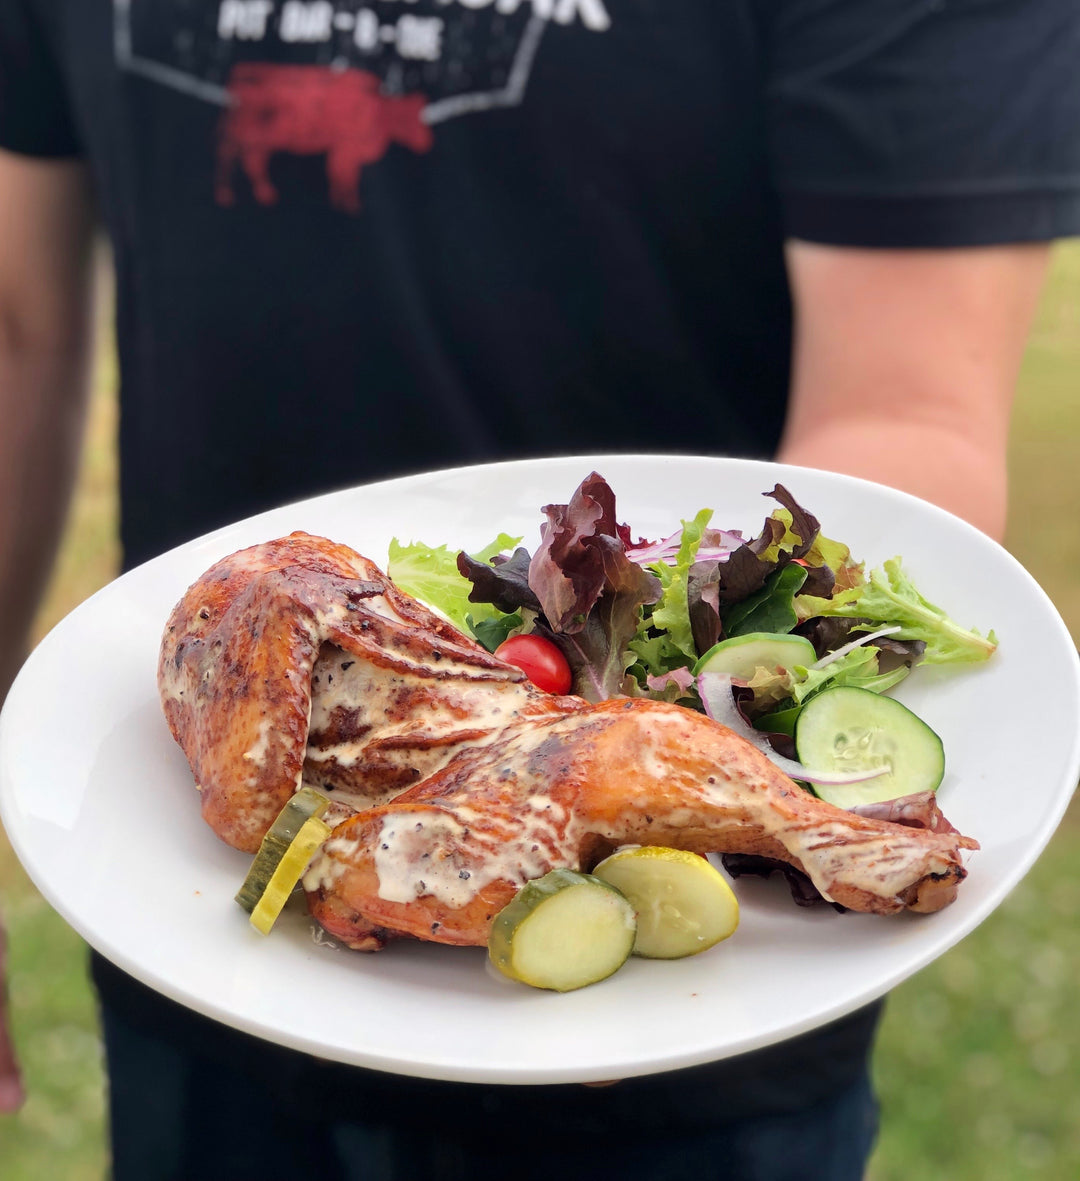 On-Demand Masterclass: "Smoked Chicken with Alabama White Sauce" with Chef Ken Hess